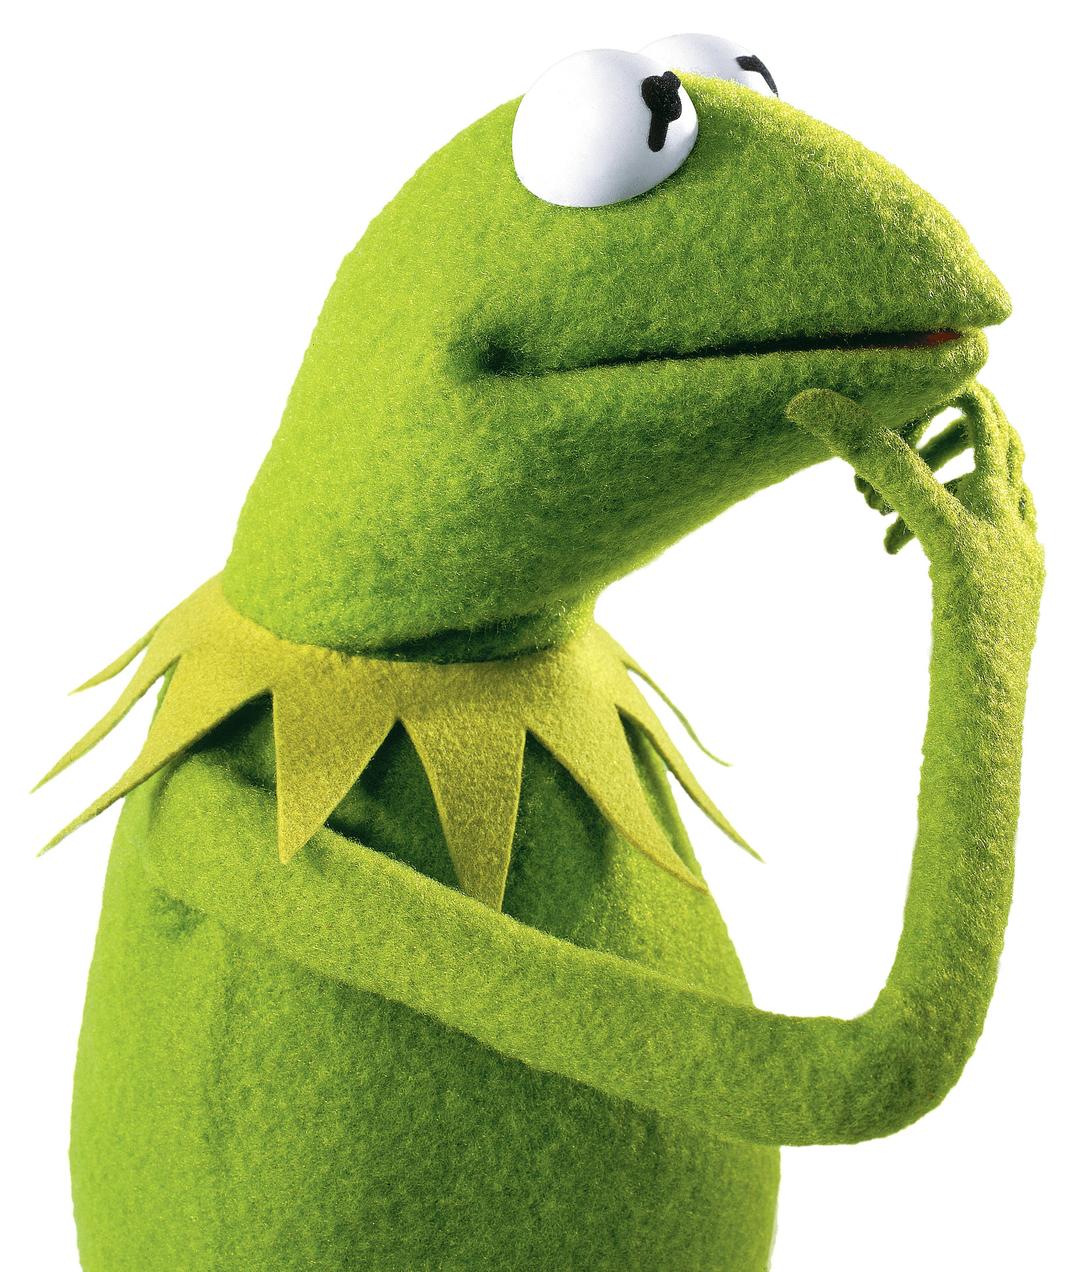 Kermit the Frog Thinking png transparent